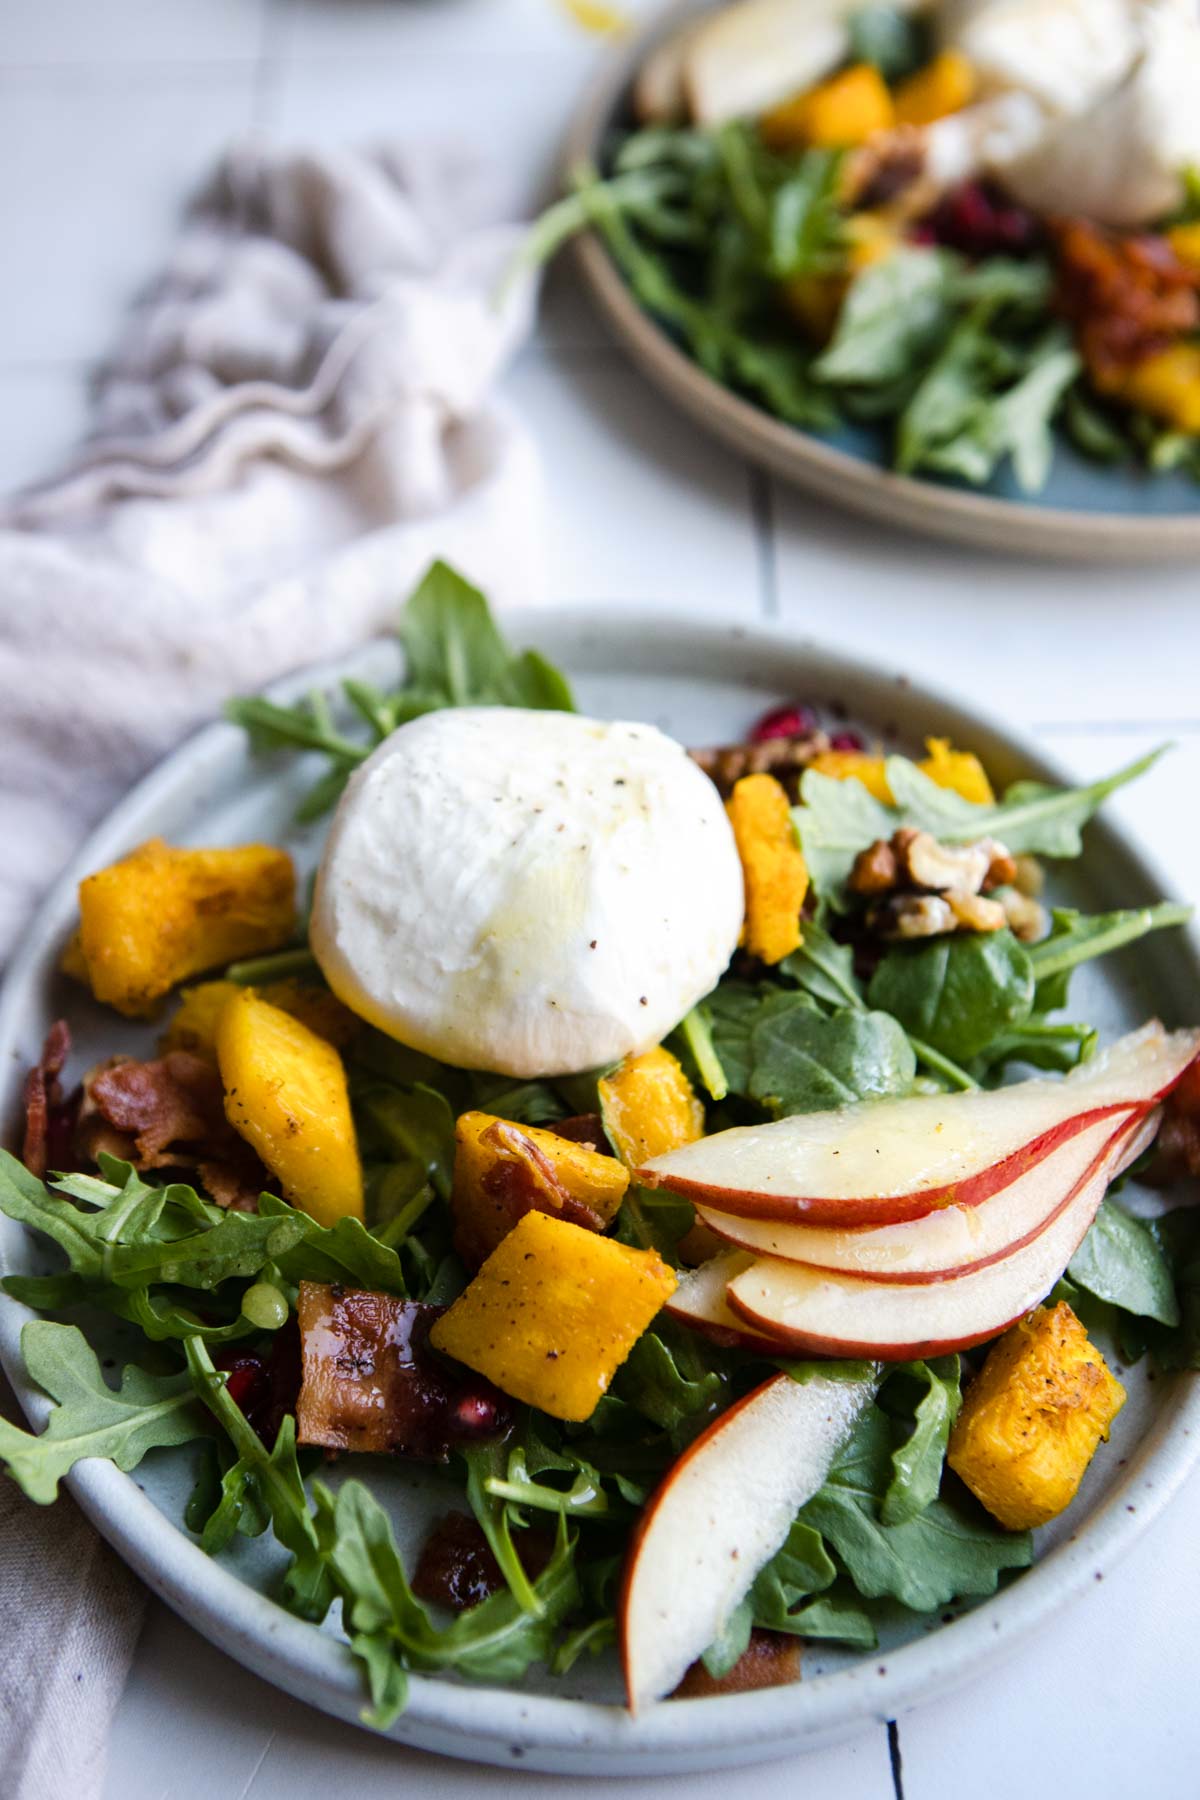 green plate filled with arugula, cubed and cooked pumpkin squash, sliced pear, bacon and burrata cheese